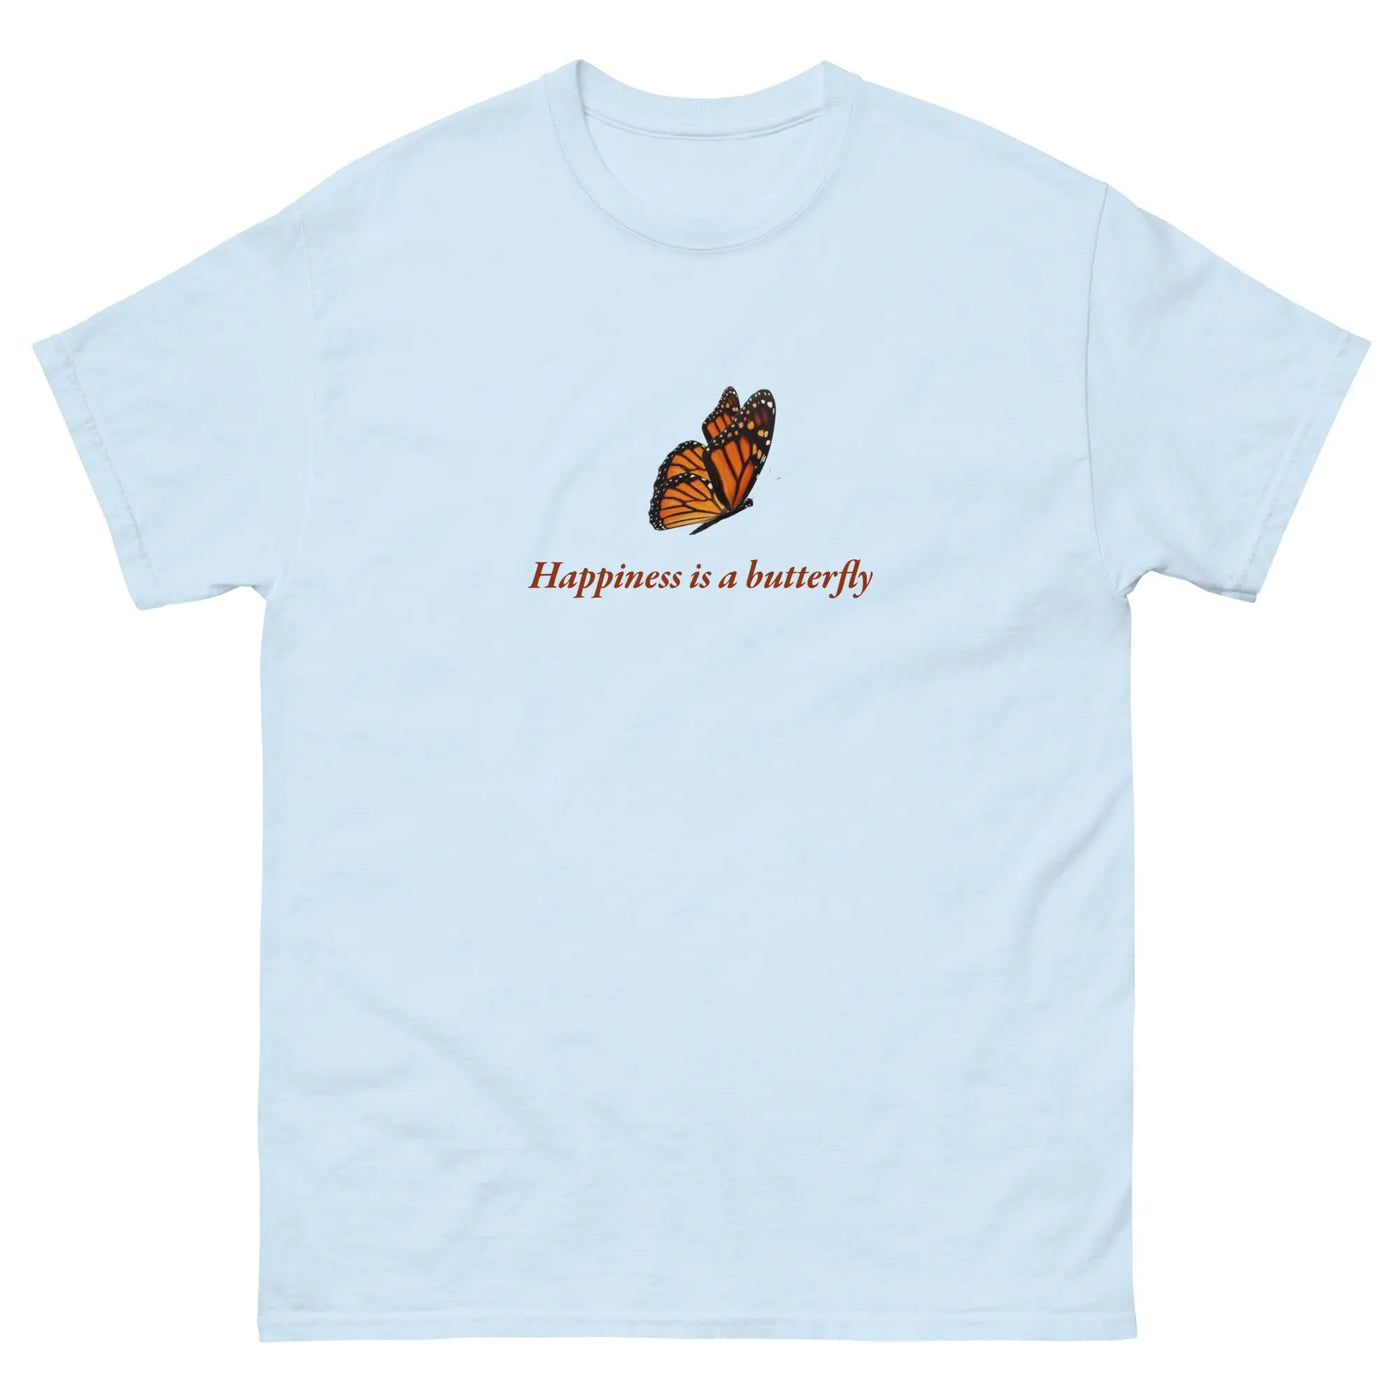 Happiness is a butterfly Tee